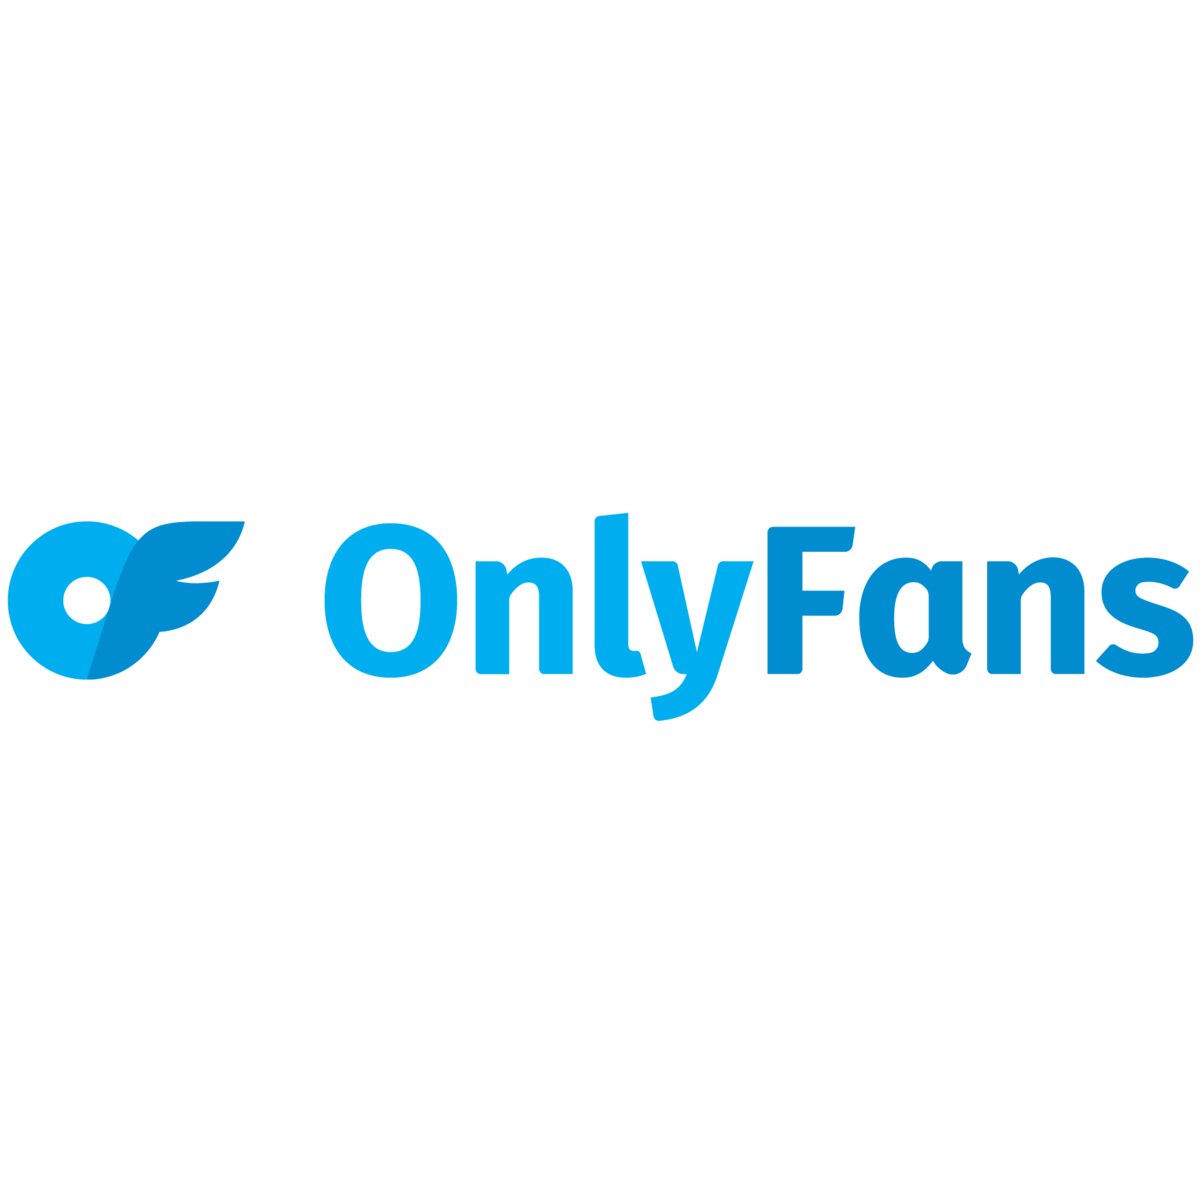 How To Start Your Onlyfans